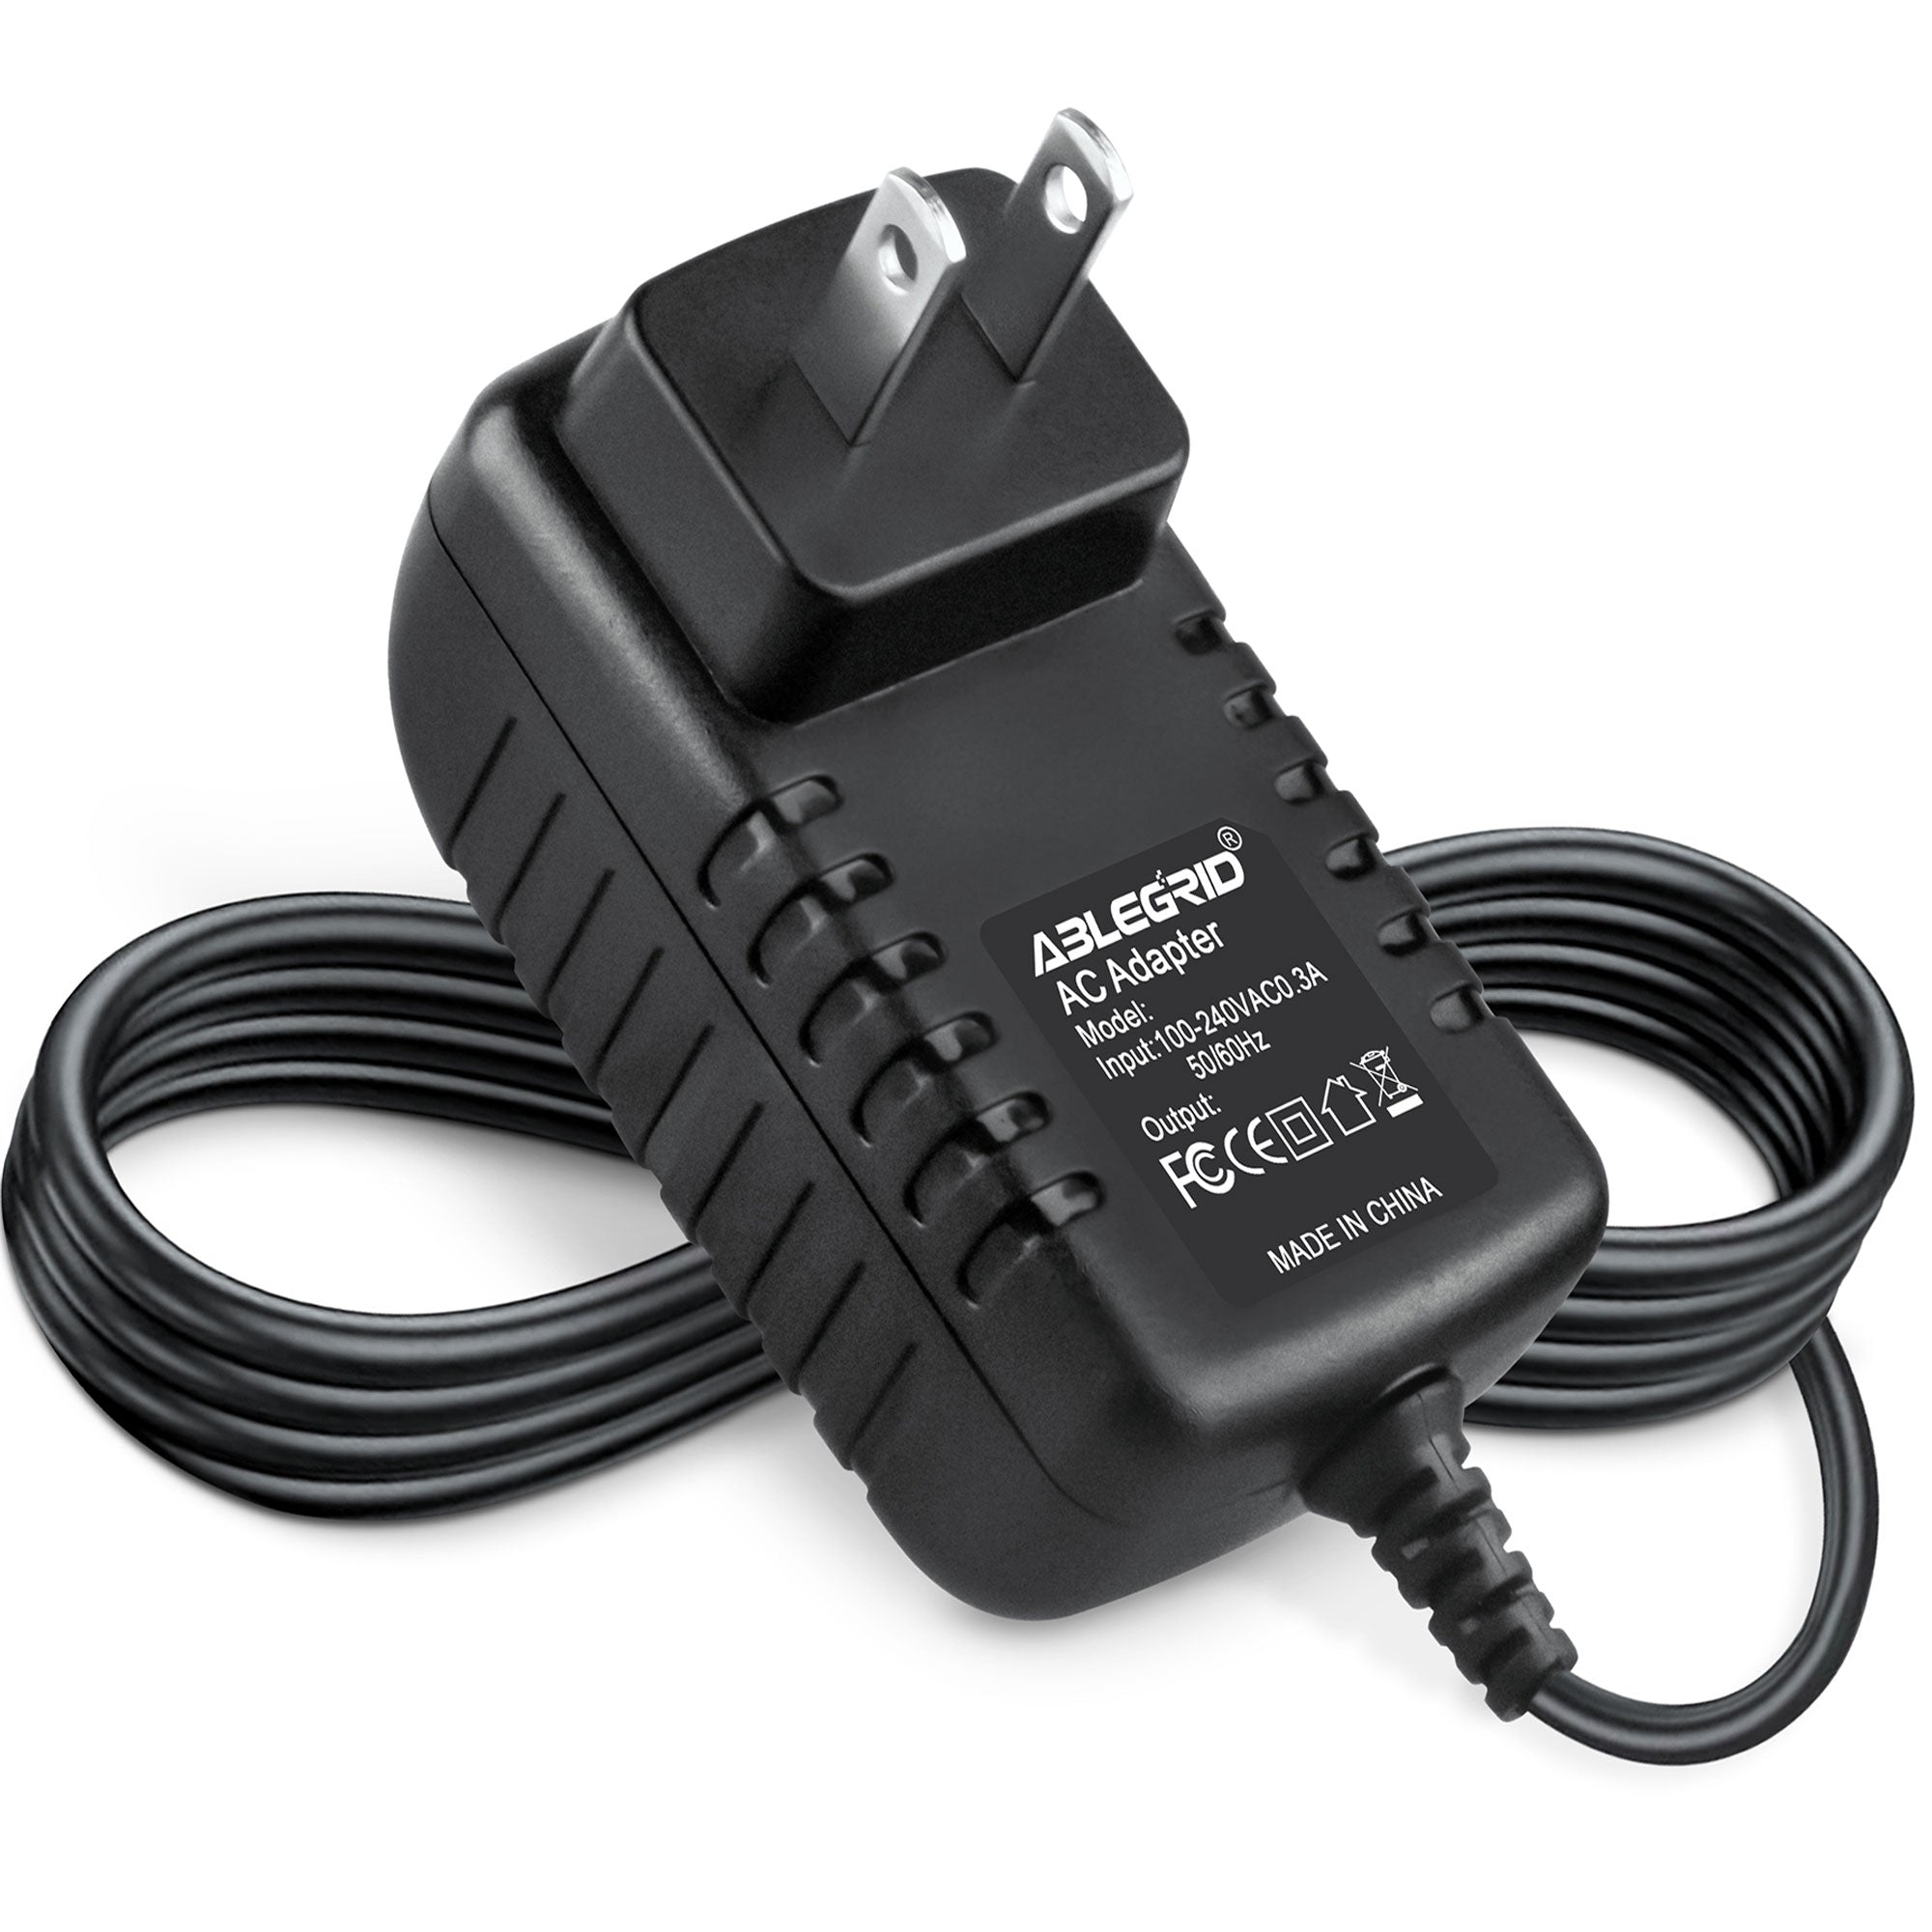 AbleGrid AC / DC Adapter for SIL Sunstrong SSA-5AP-09 US 060030 SSA-5AP-09US060030 Clarity Switching Power Supply Cord Cable PS Wall Home Charger Input: 100 - 240 VAC Worldwide Use Mains PSU